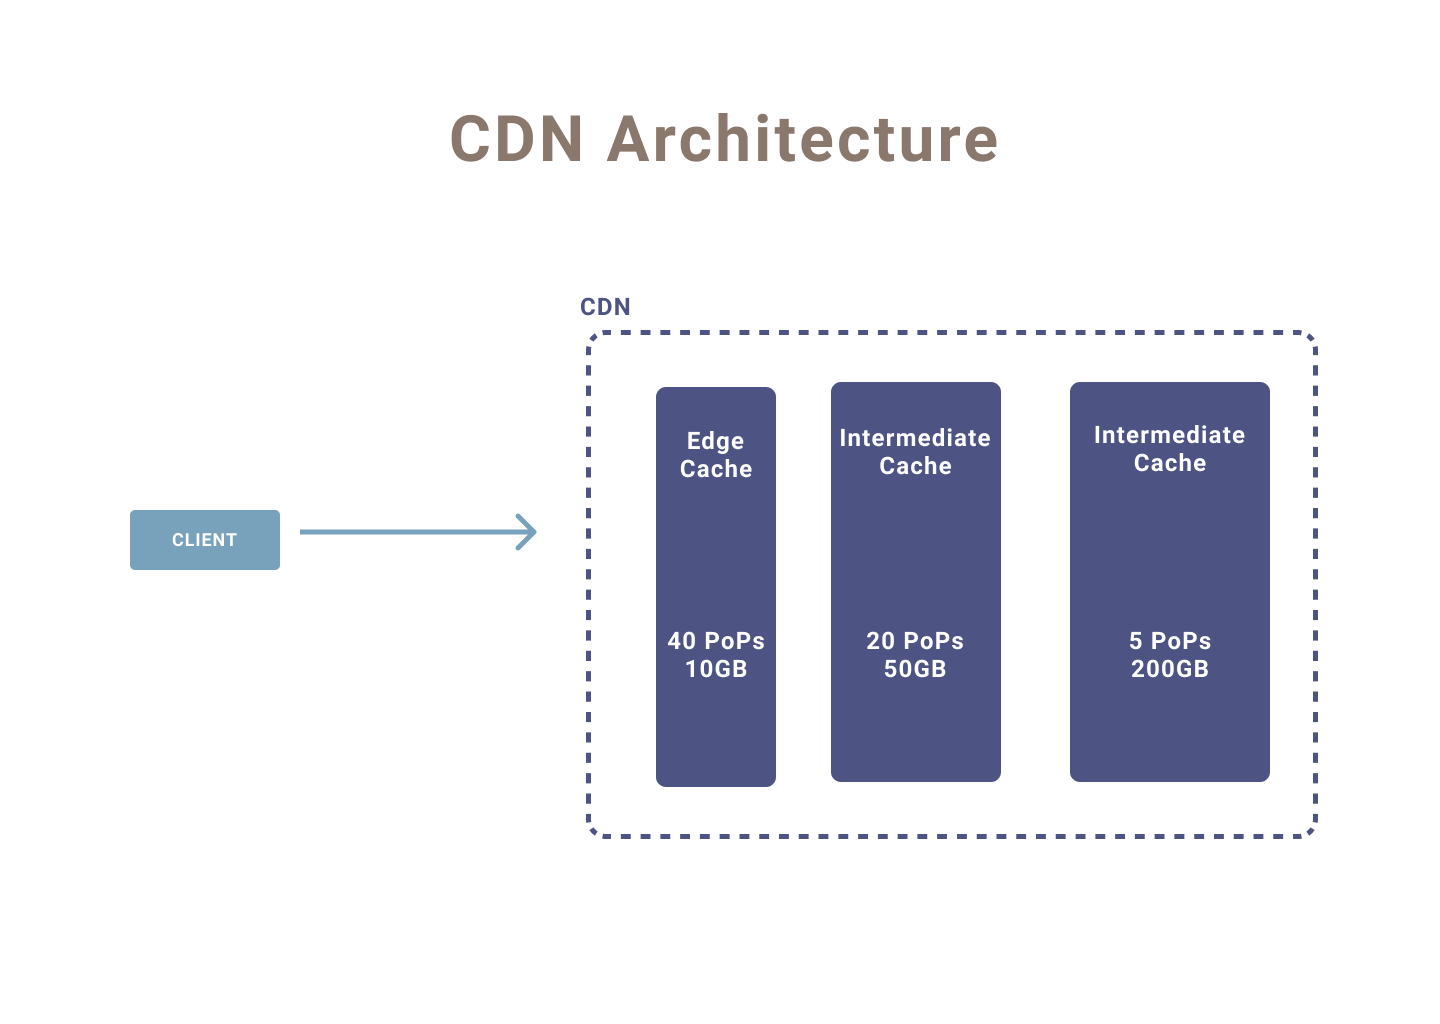 Networking for backend engineers: Why CDN's improve performance